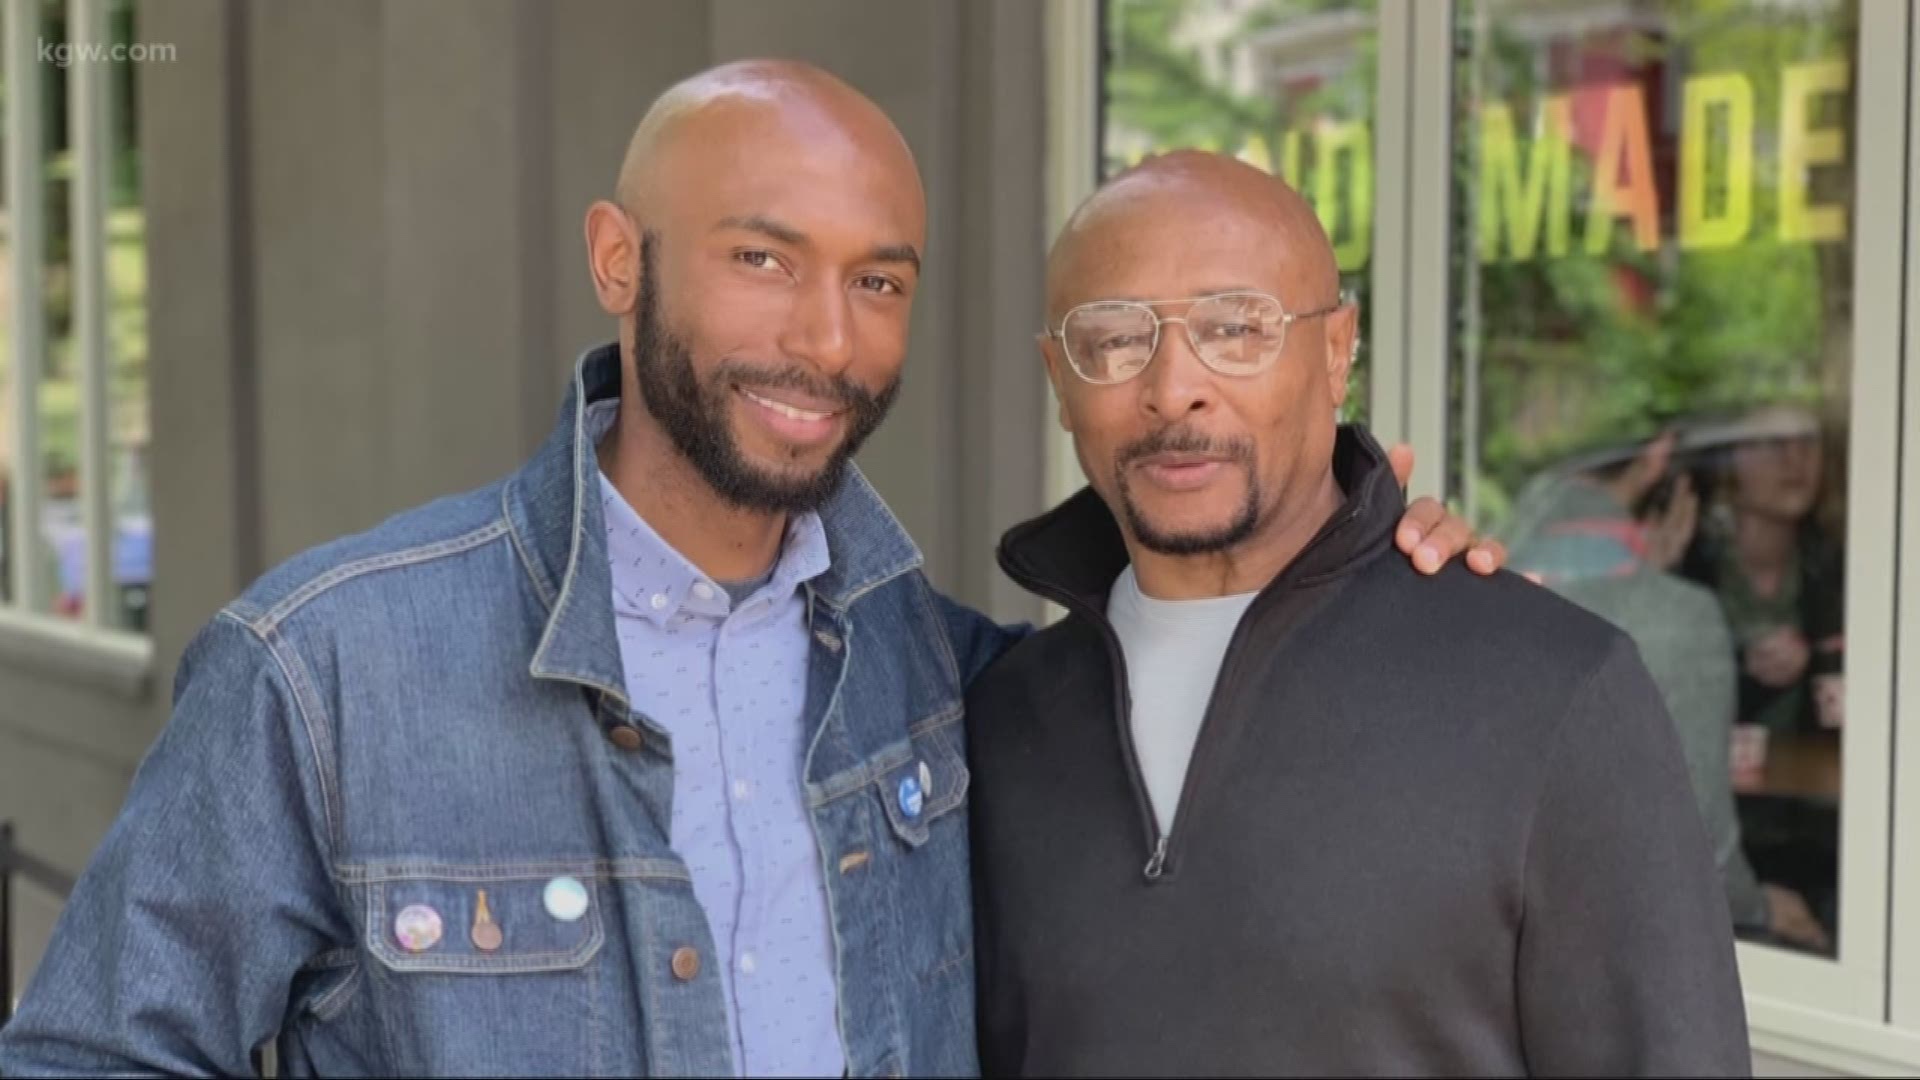 Inspirational speaker Kary Youman dropped a bomb at a Portland TedX event. He had recently discovered  his biological father, whom he had never met. He went into no detail, but KGW anchor Brenda Braxton was with Kary when he finally met his father.